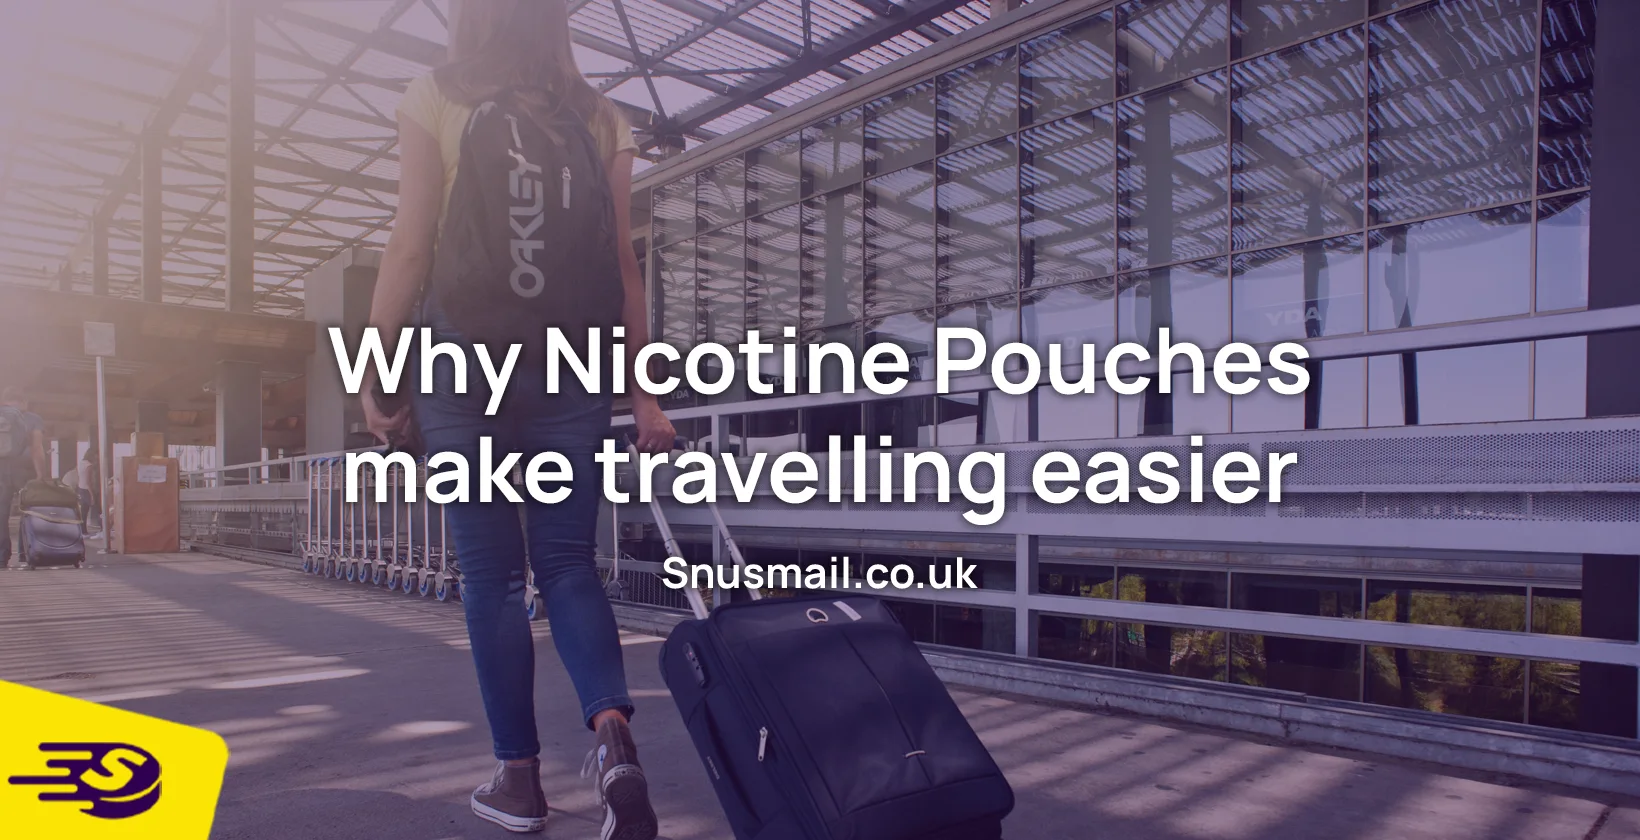 Smoking while traveling might be hard. With nicotine pouches you can get your nicotine fix where ever you are!